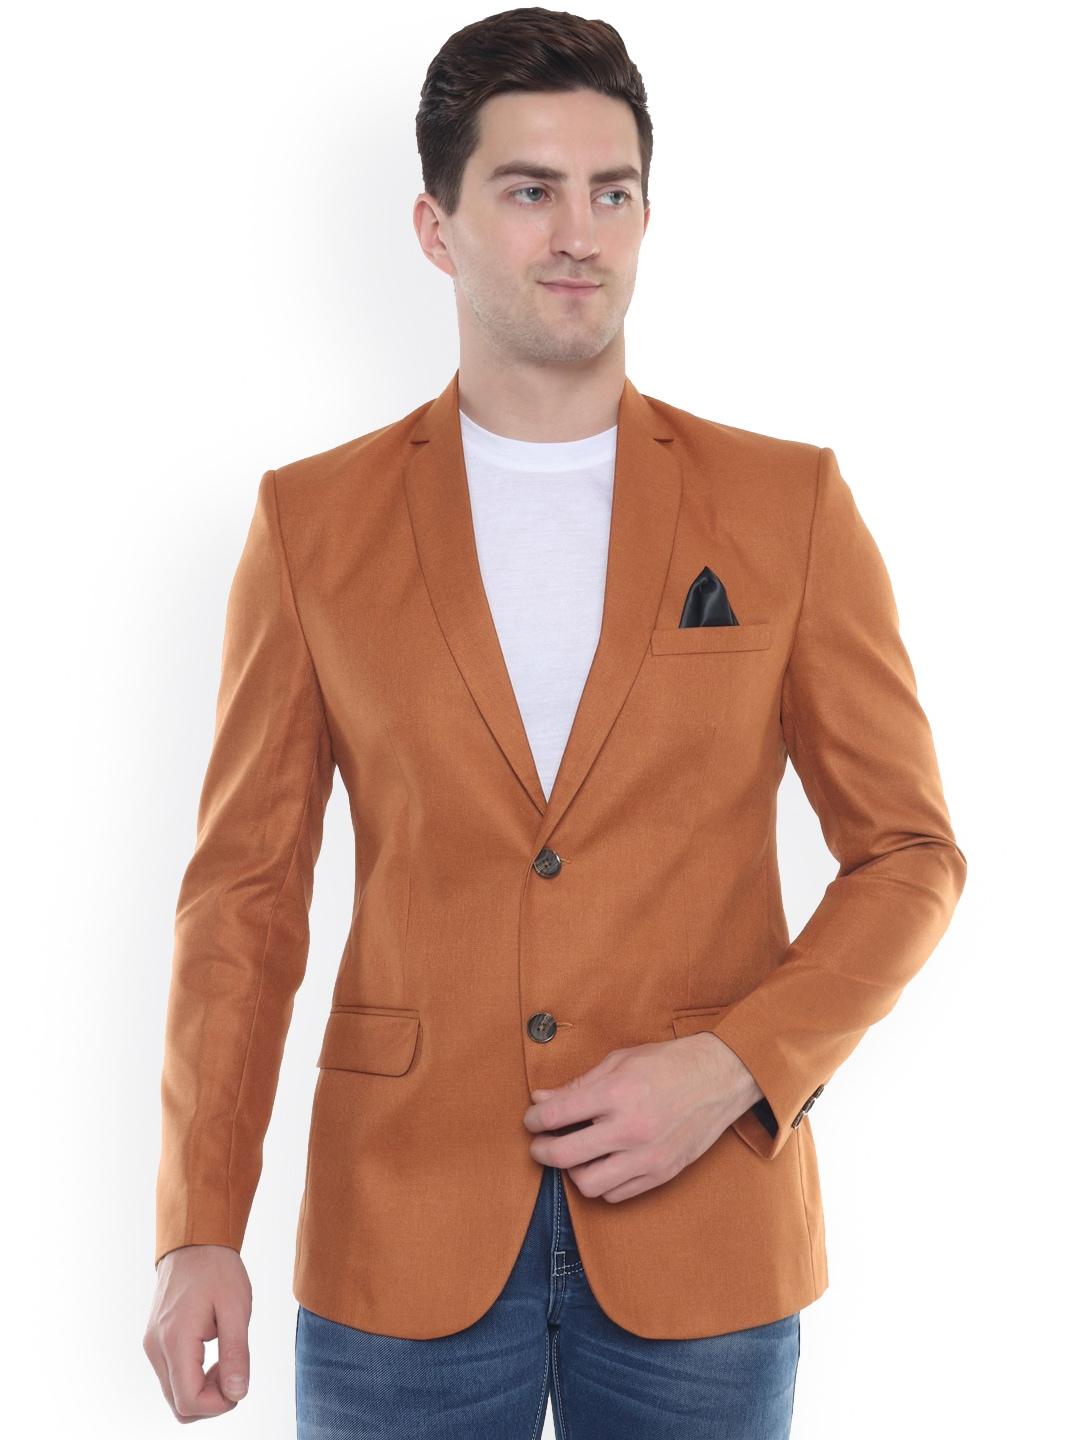 dkgf-fashion-men-mustard-solid-single-breasted-party-blazers